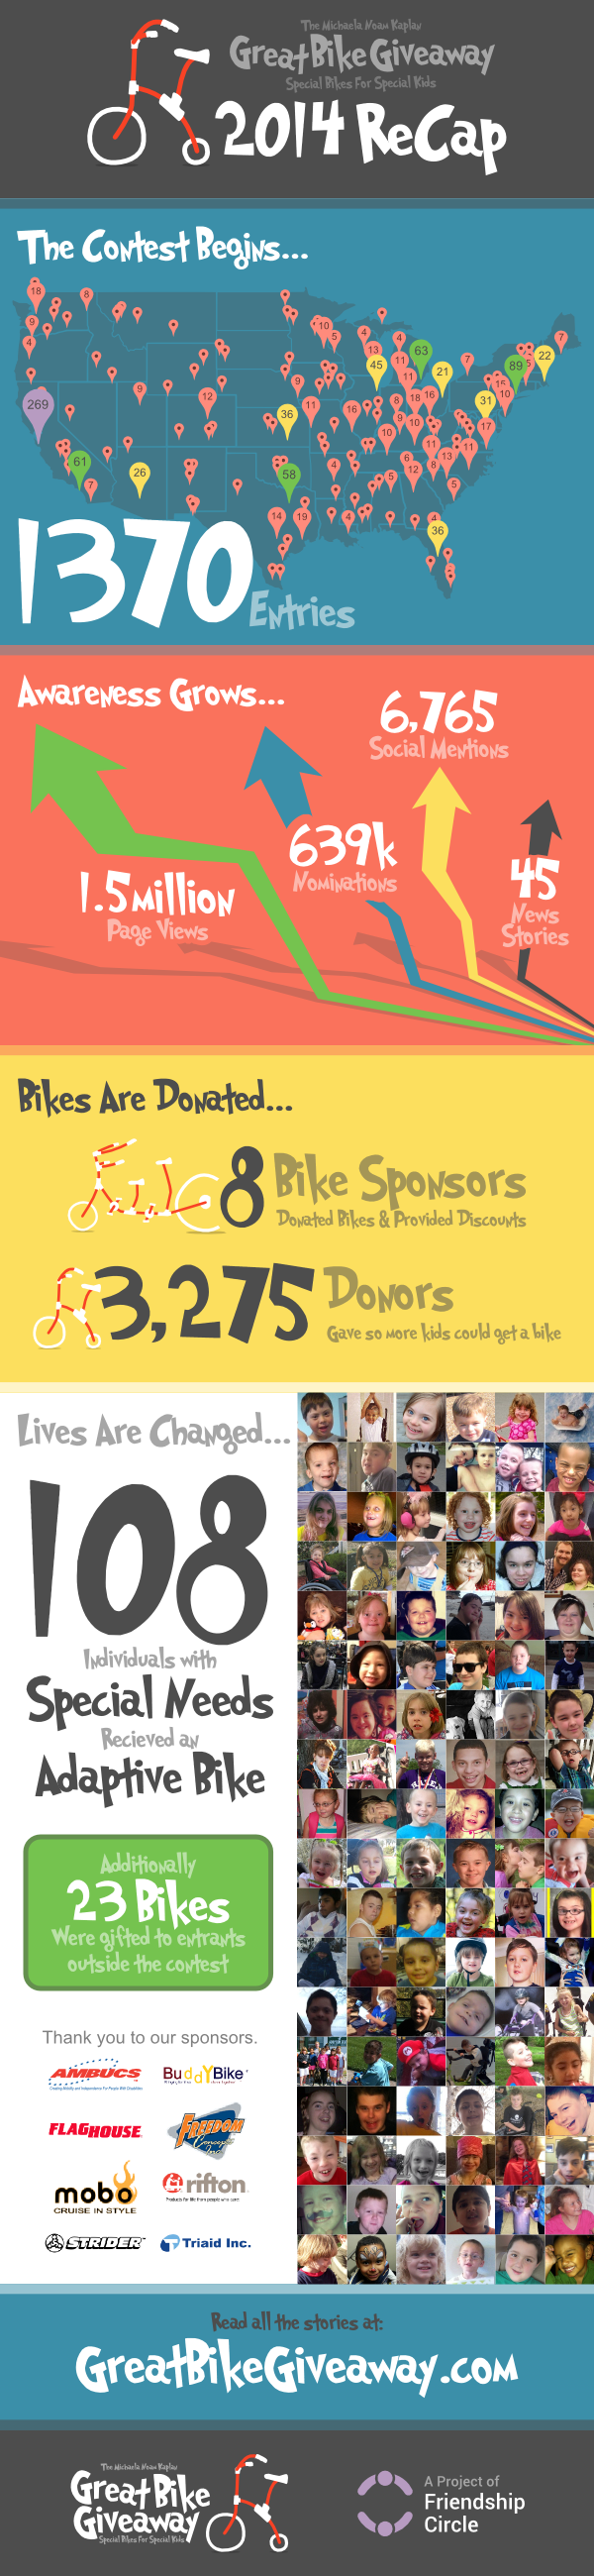 Great Bike Giveaway Infographic